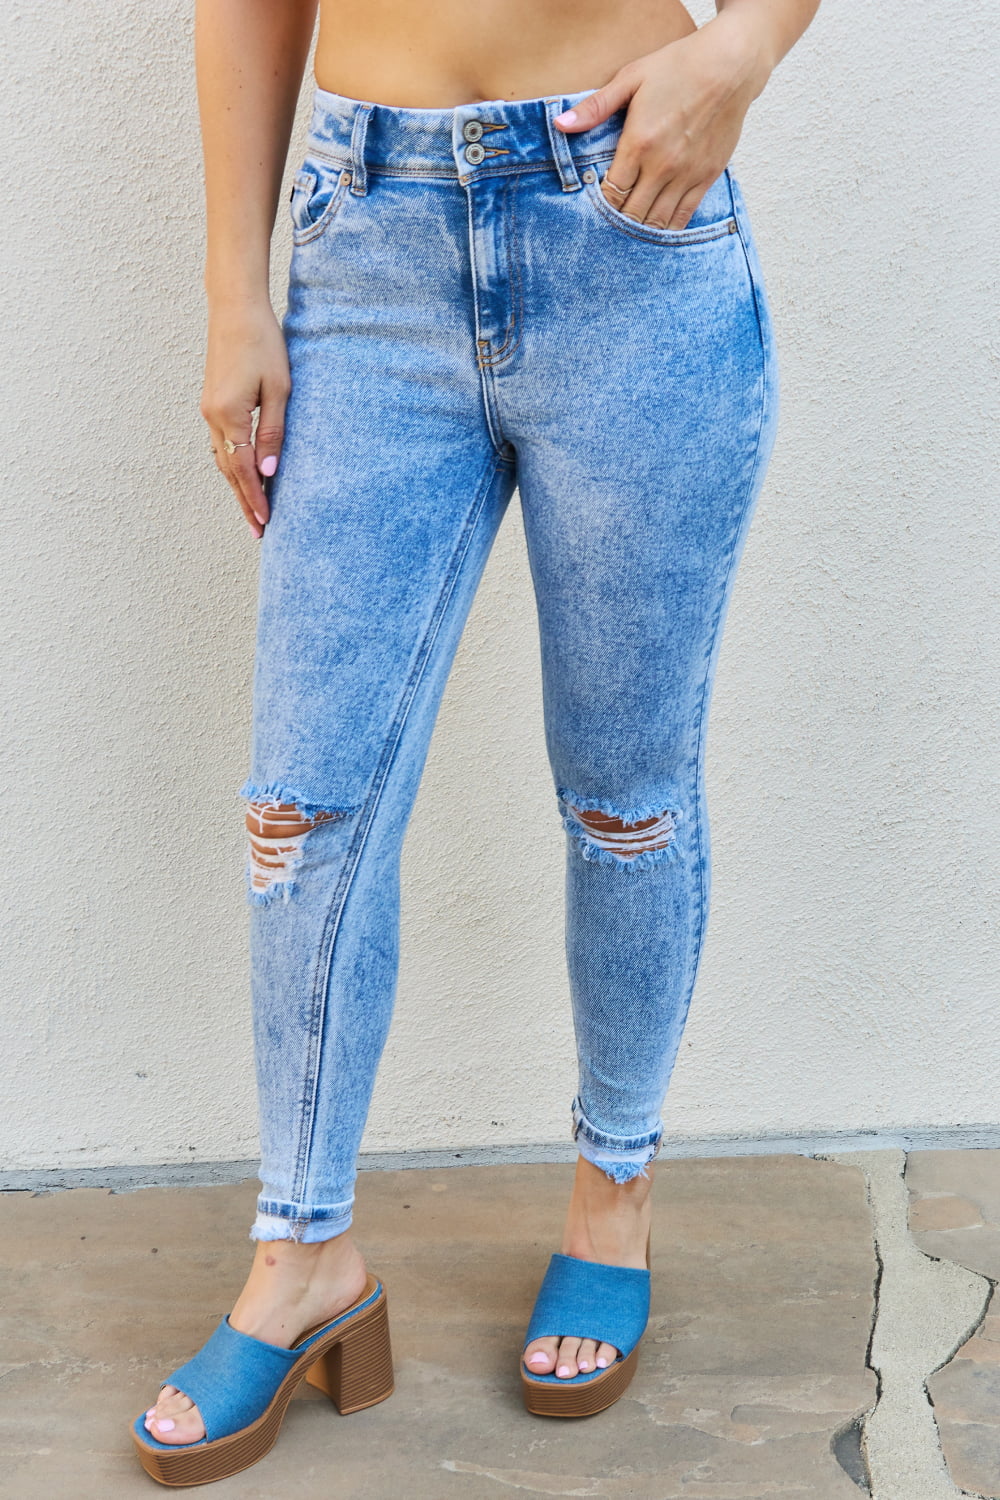 Kancan Emma Full size High Rise Distressed Skinny Jeans- ONLINE ONLY 2-10 DAY SHIPPING